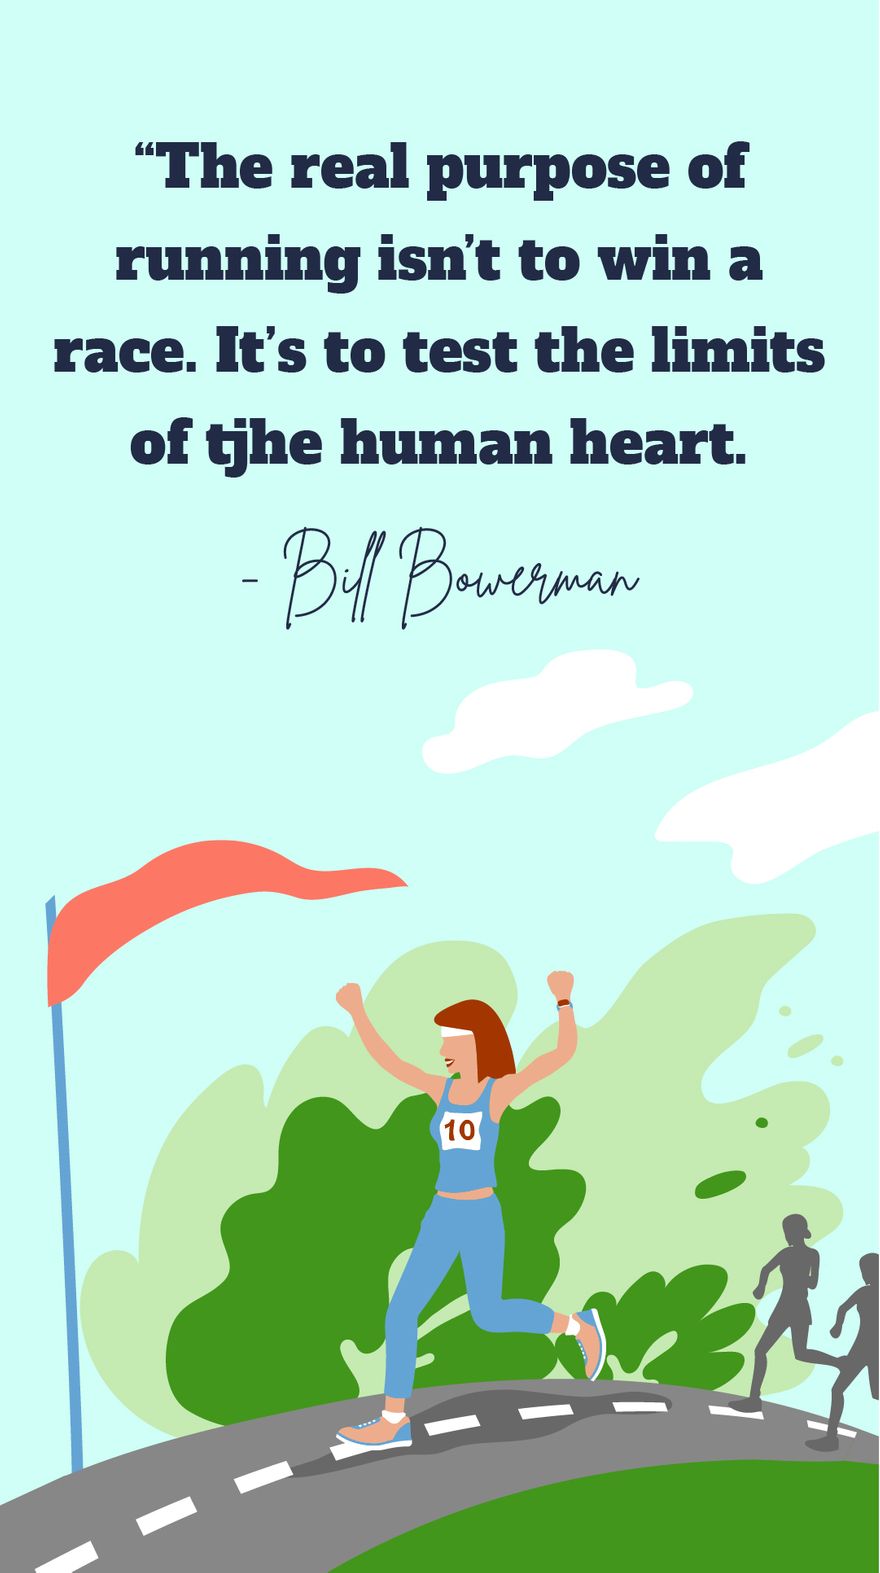 Free Bill Bowerman-The real purpose of running isn’t to win a race. It’s to test the limits of the human heart.